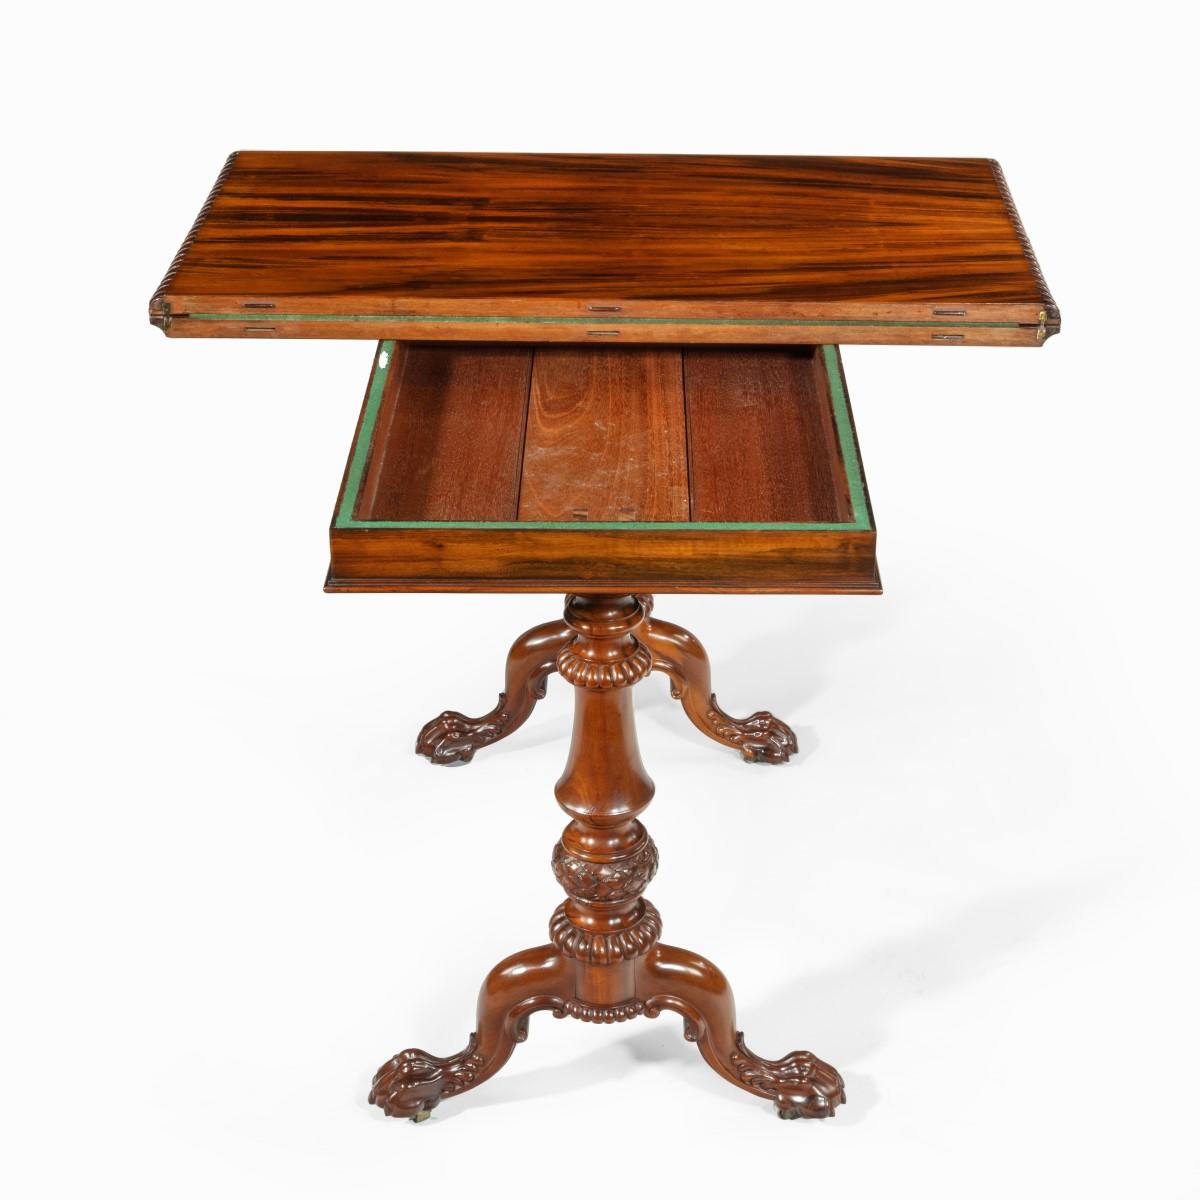 English Early Victorian Goncalo Alves Card Table Attributed to Gillows For Sale